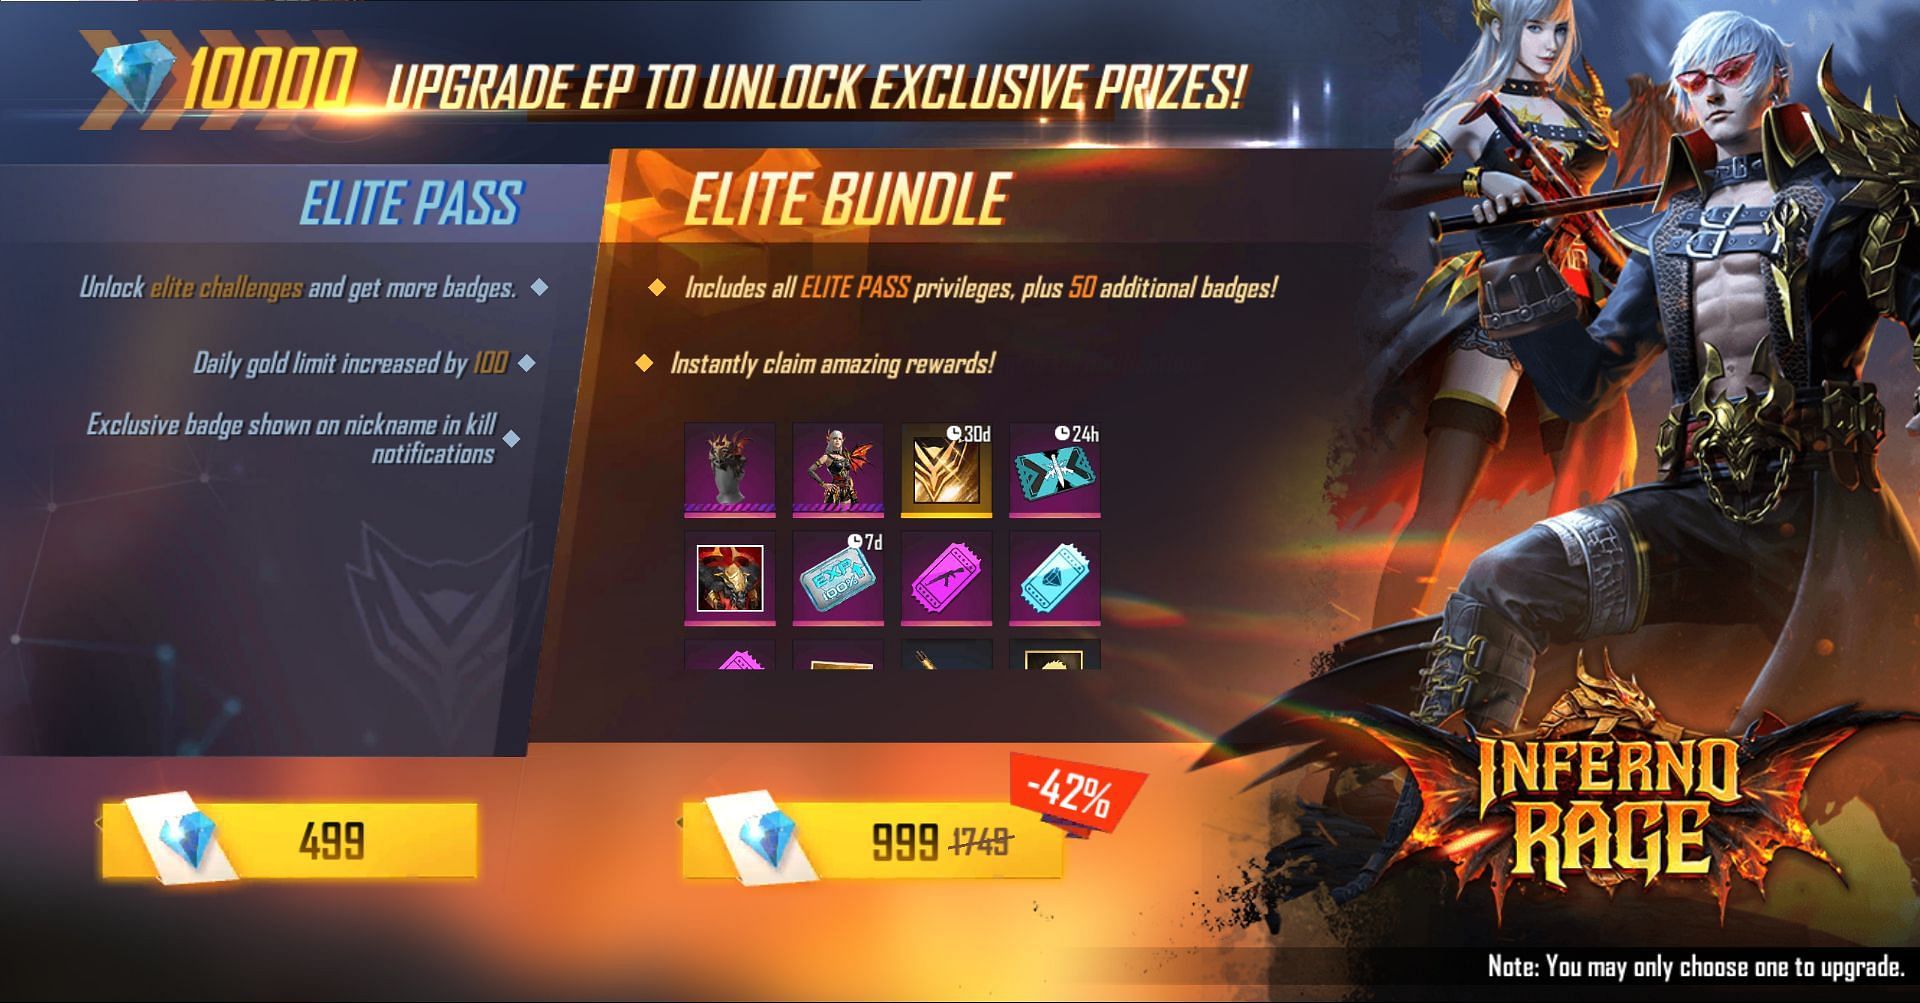 Users can purchase the Elite Pass or Elite Bundle (Image via Free Fire)